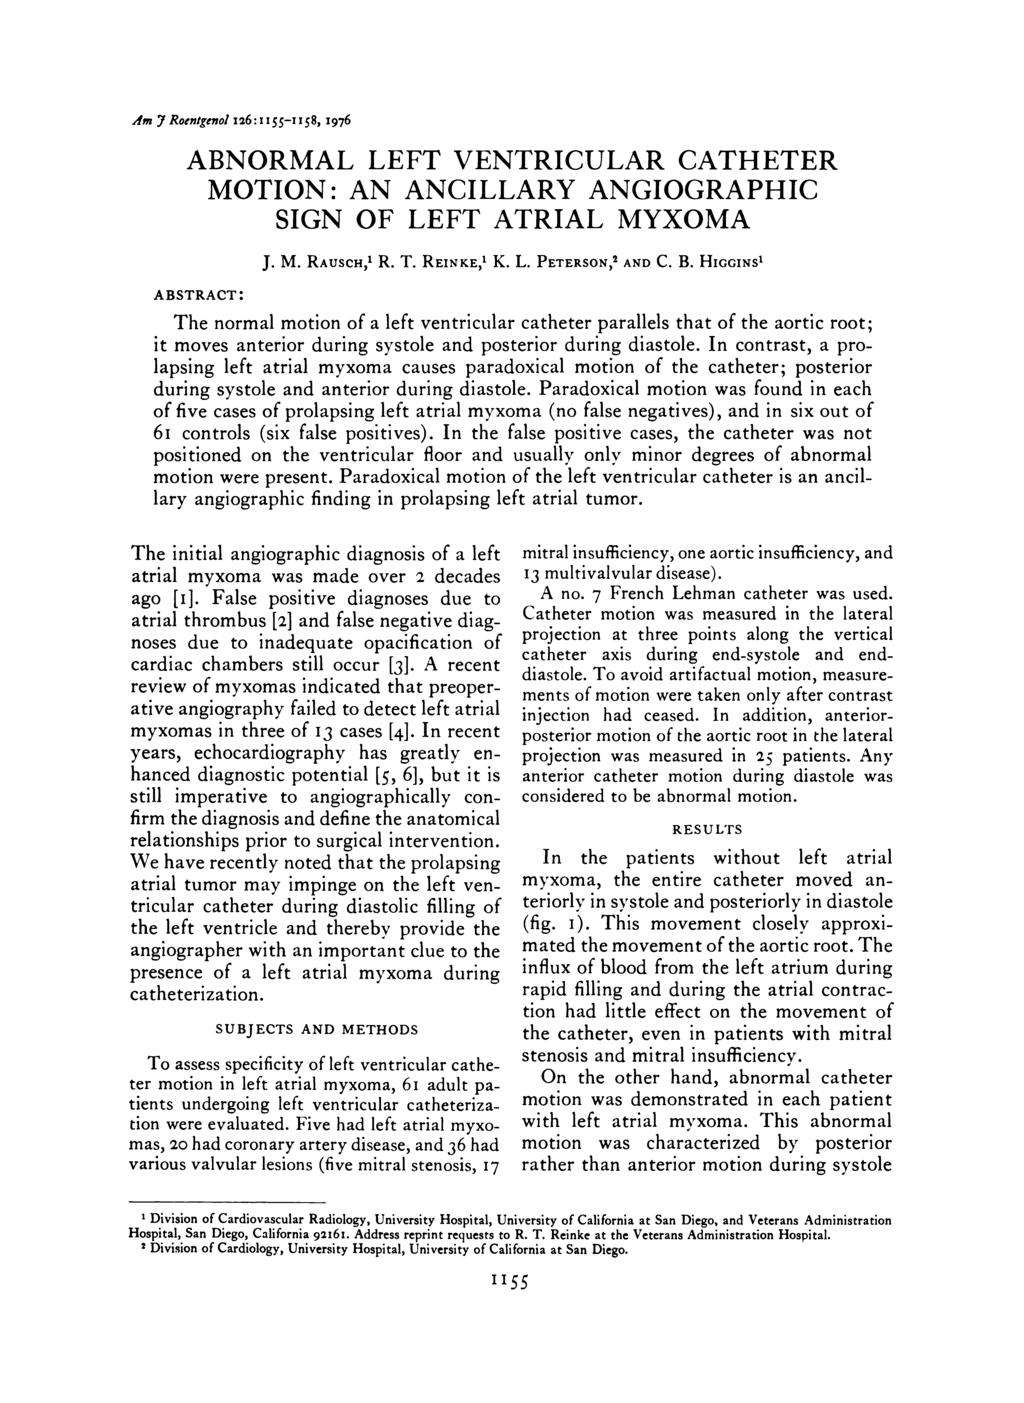 Am JRoentgenolla6:II55-II58, 1976 ABNORMAL LEFT VENTRICULAR CATHETER MOTION: AN ANCILLARY ANGIOGRAPHIC SIGN OF LEFT ATRIAL MYXOMA ABsTRACT: J. M. RAU5CH, R. T. REINKE, K. L. PETERSON,2 AND C. B.